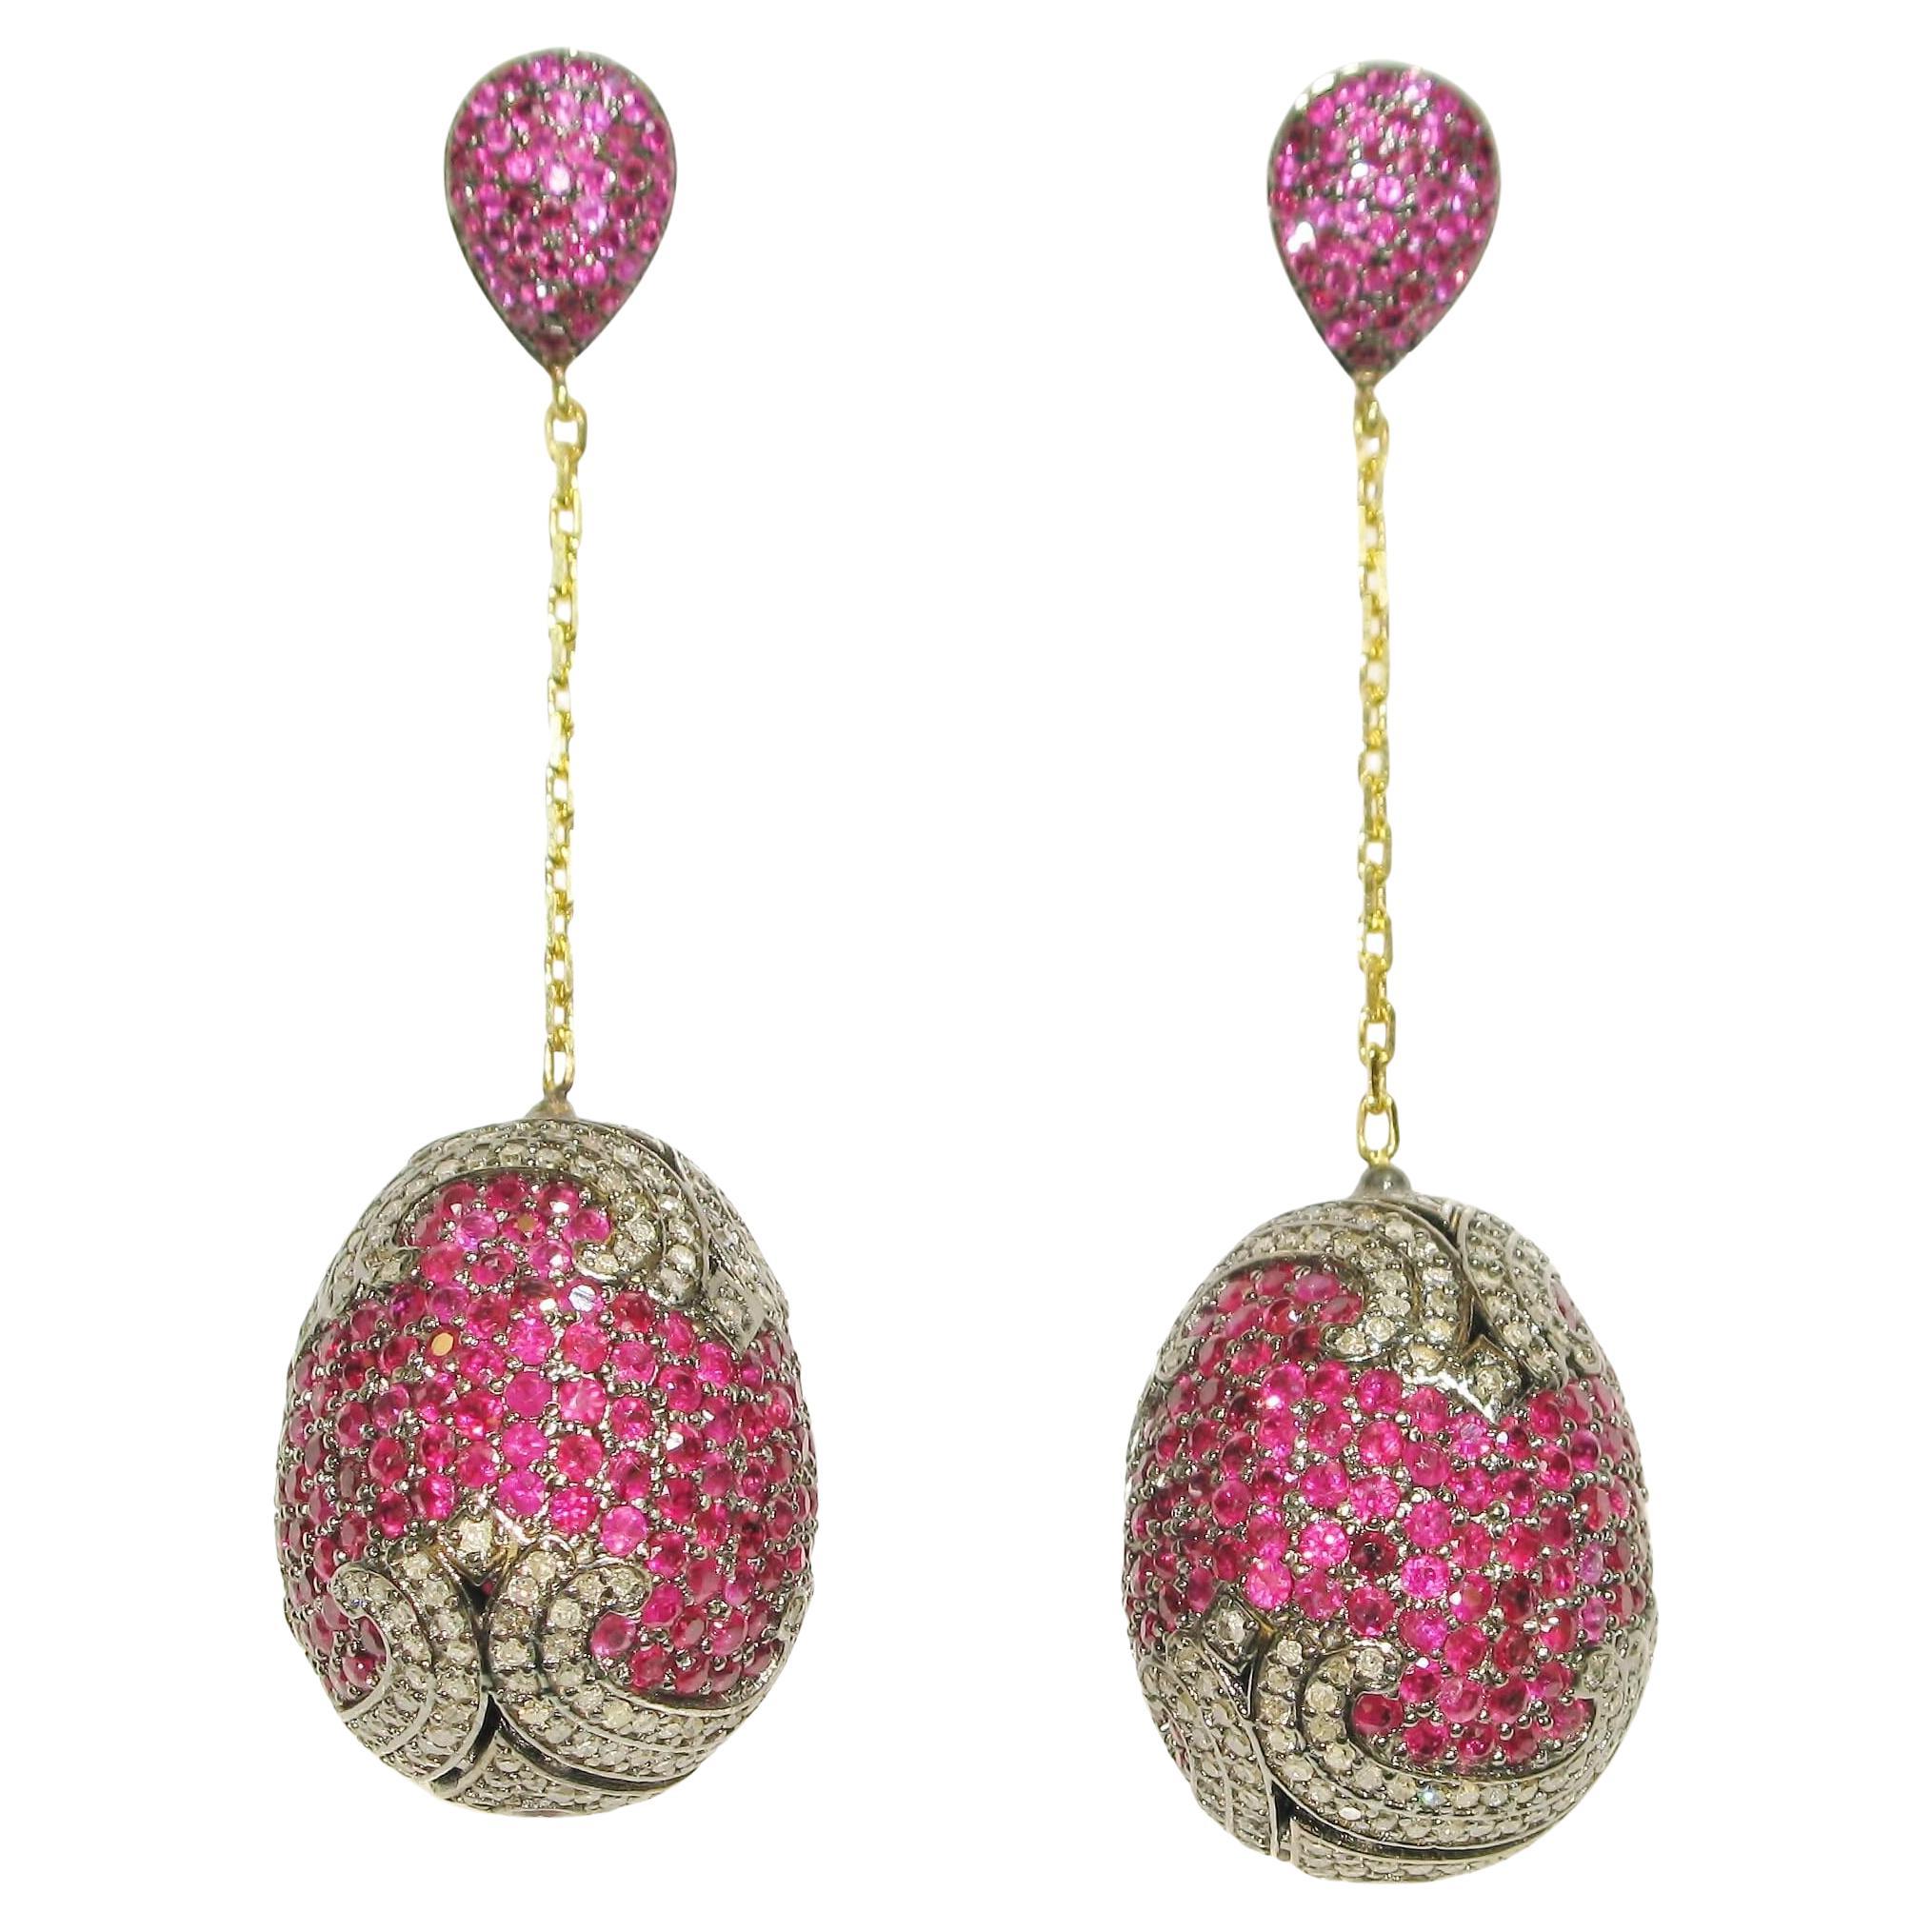 Ruby & Diamonds Pave Ball Dangle Earrings Made In 18k Gold & Silver